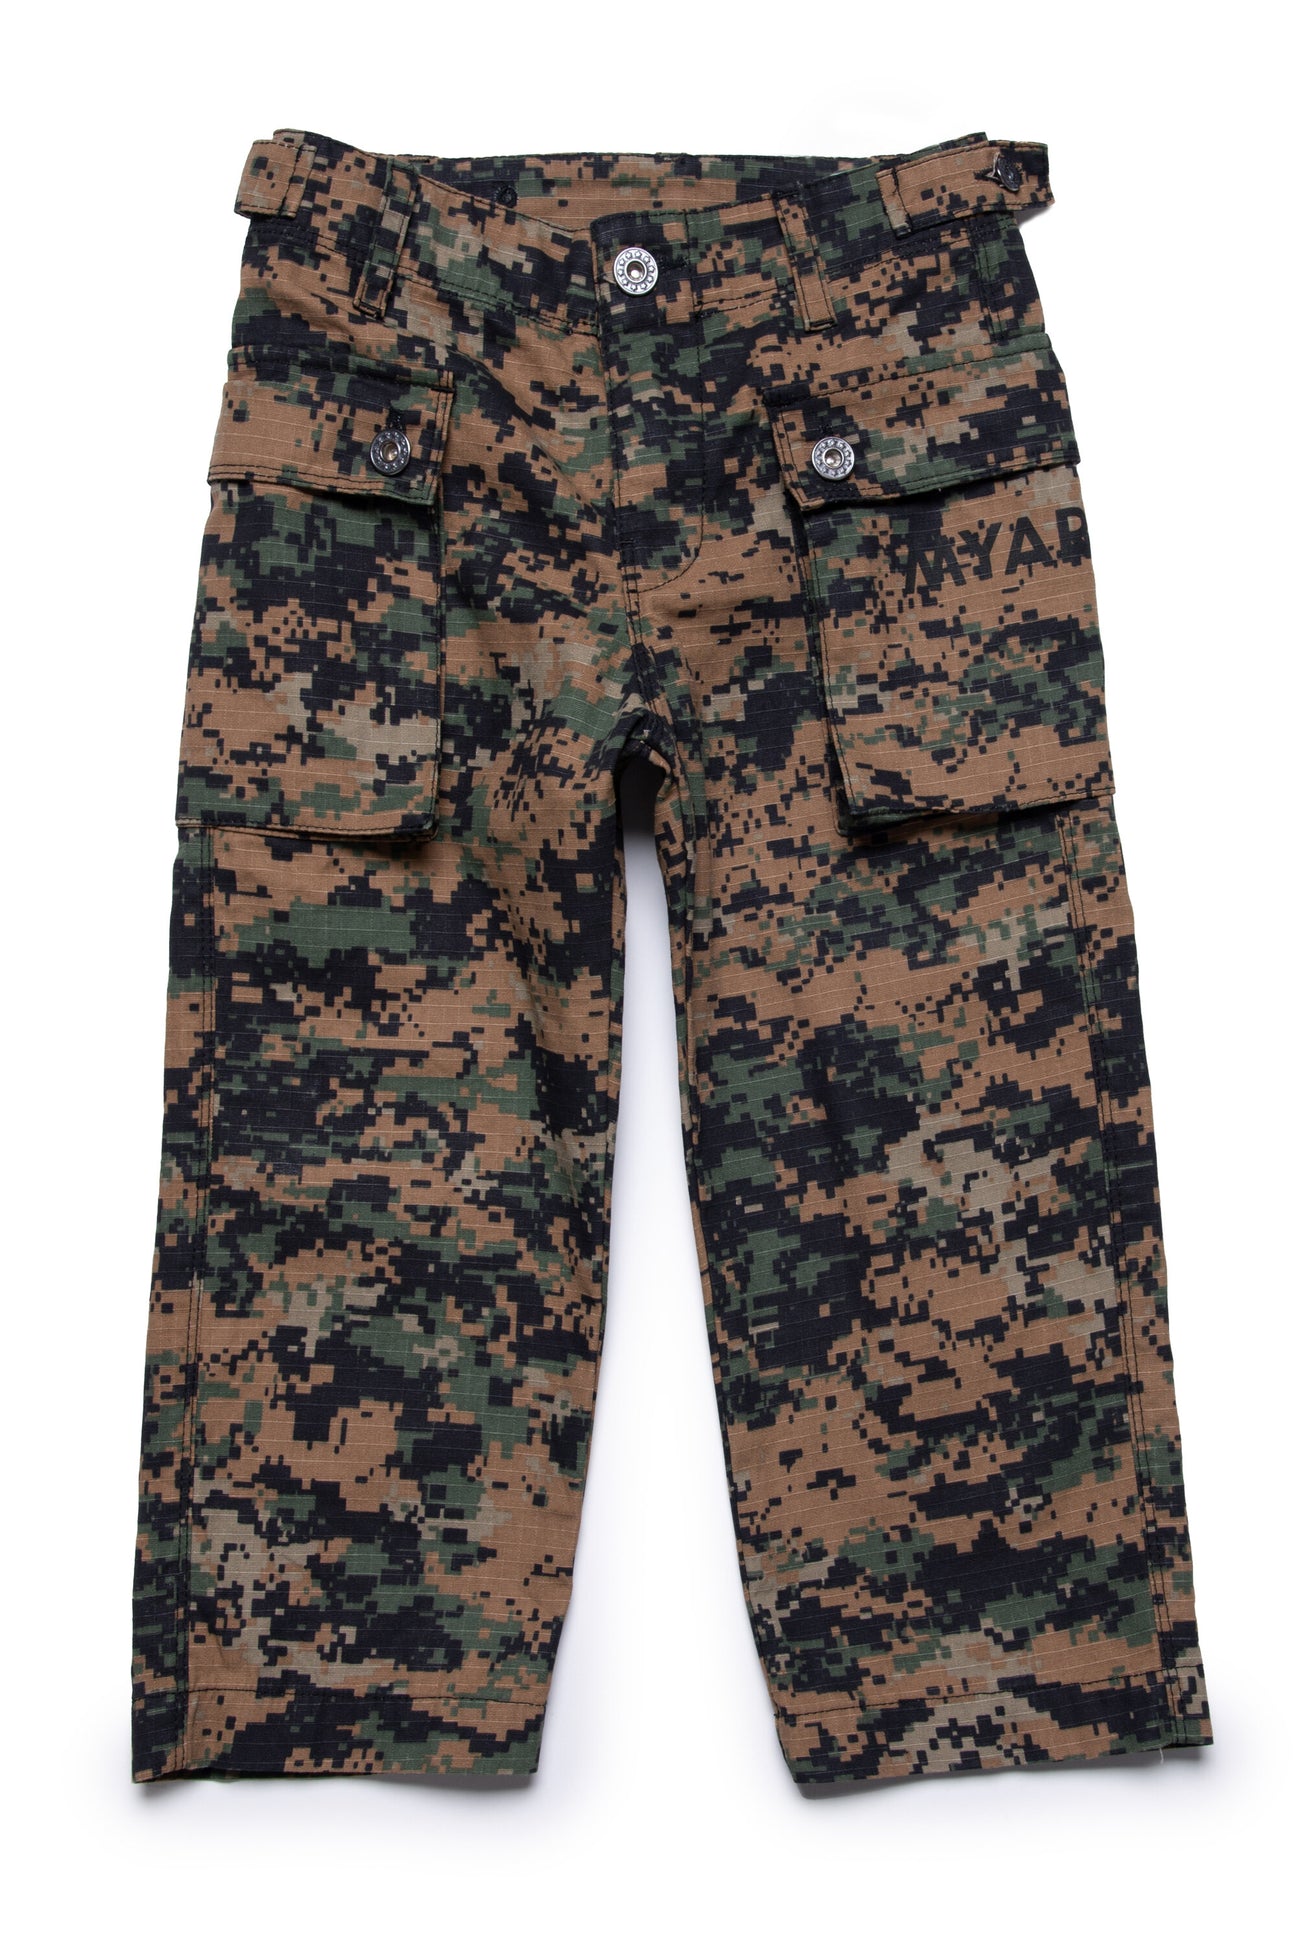 Deadstock fabric camouflage cargo pants 